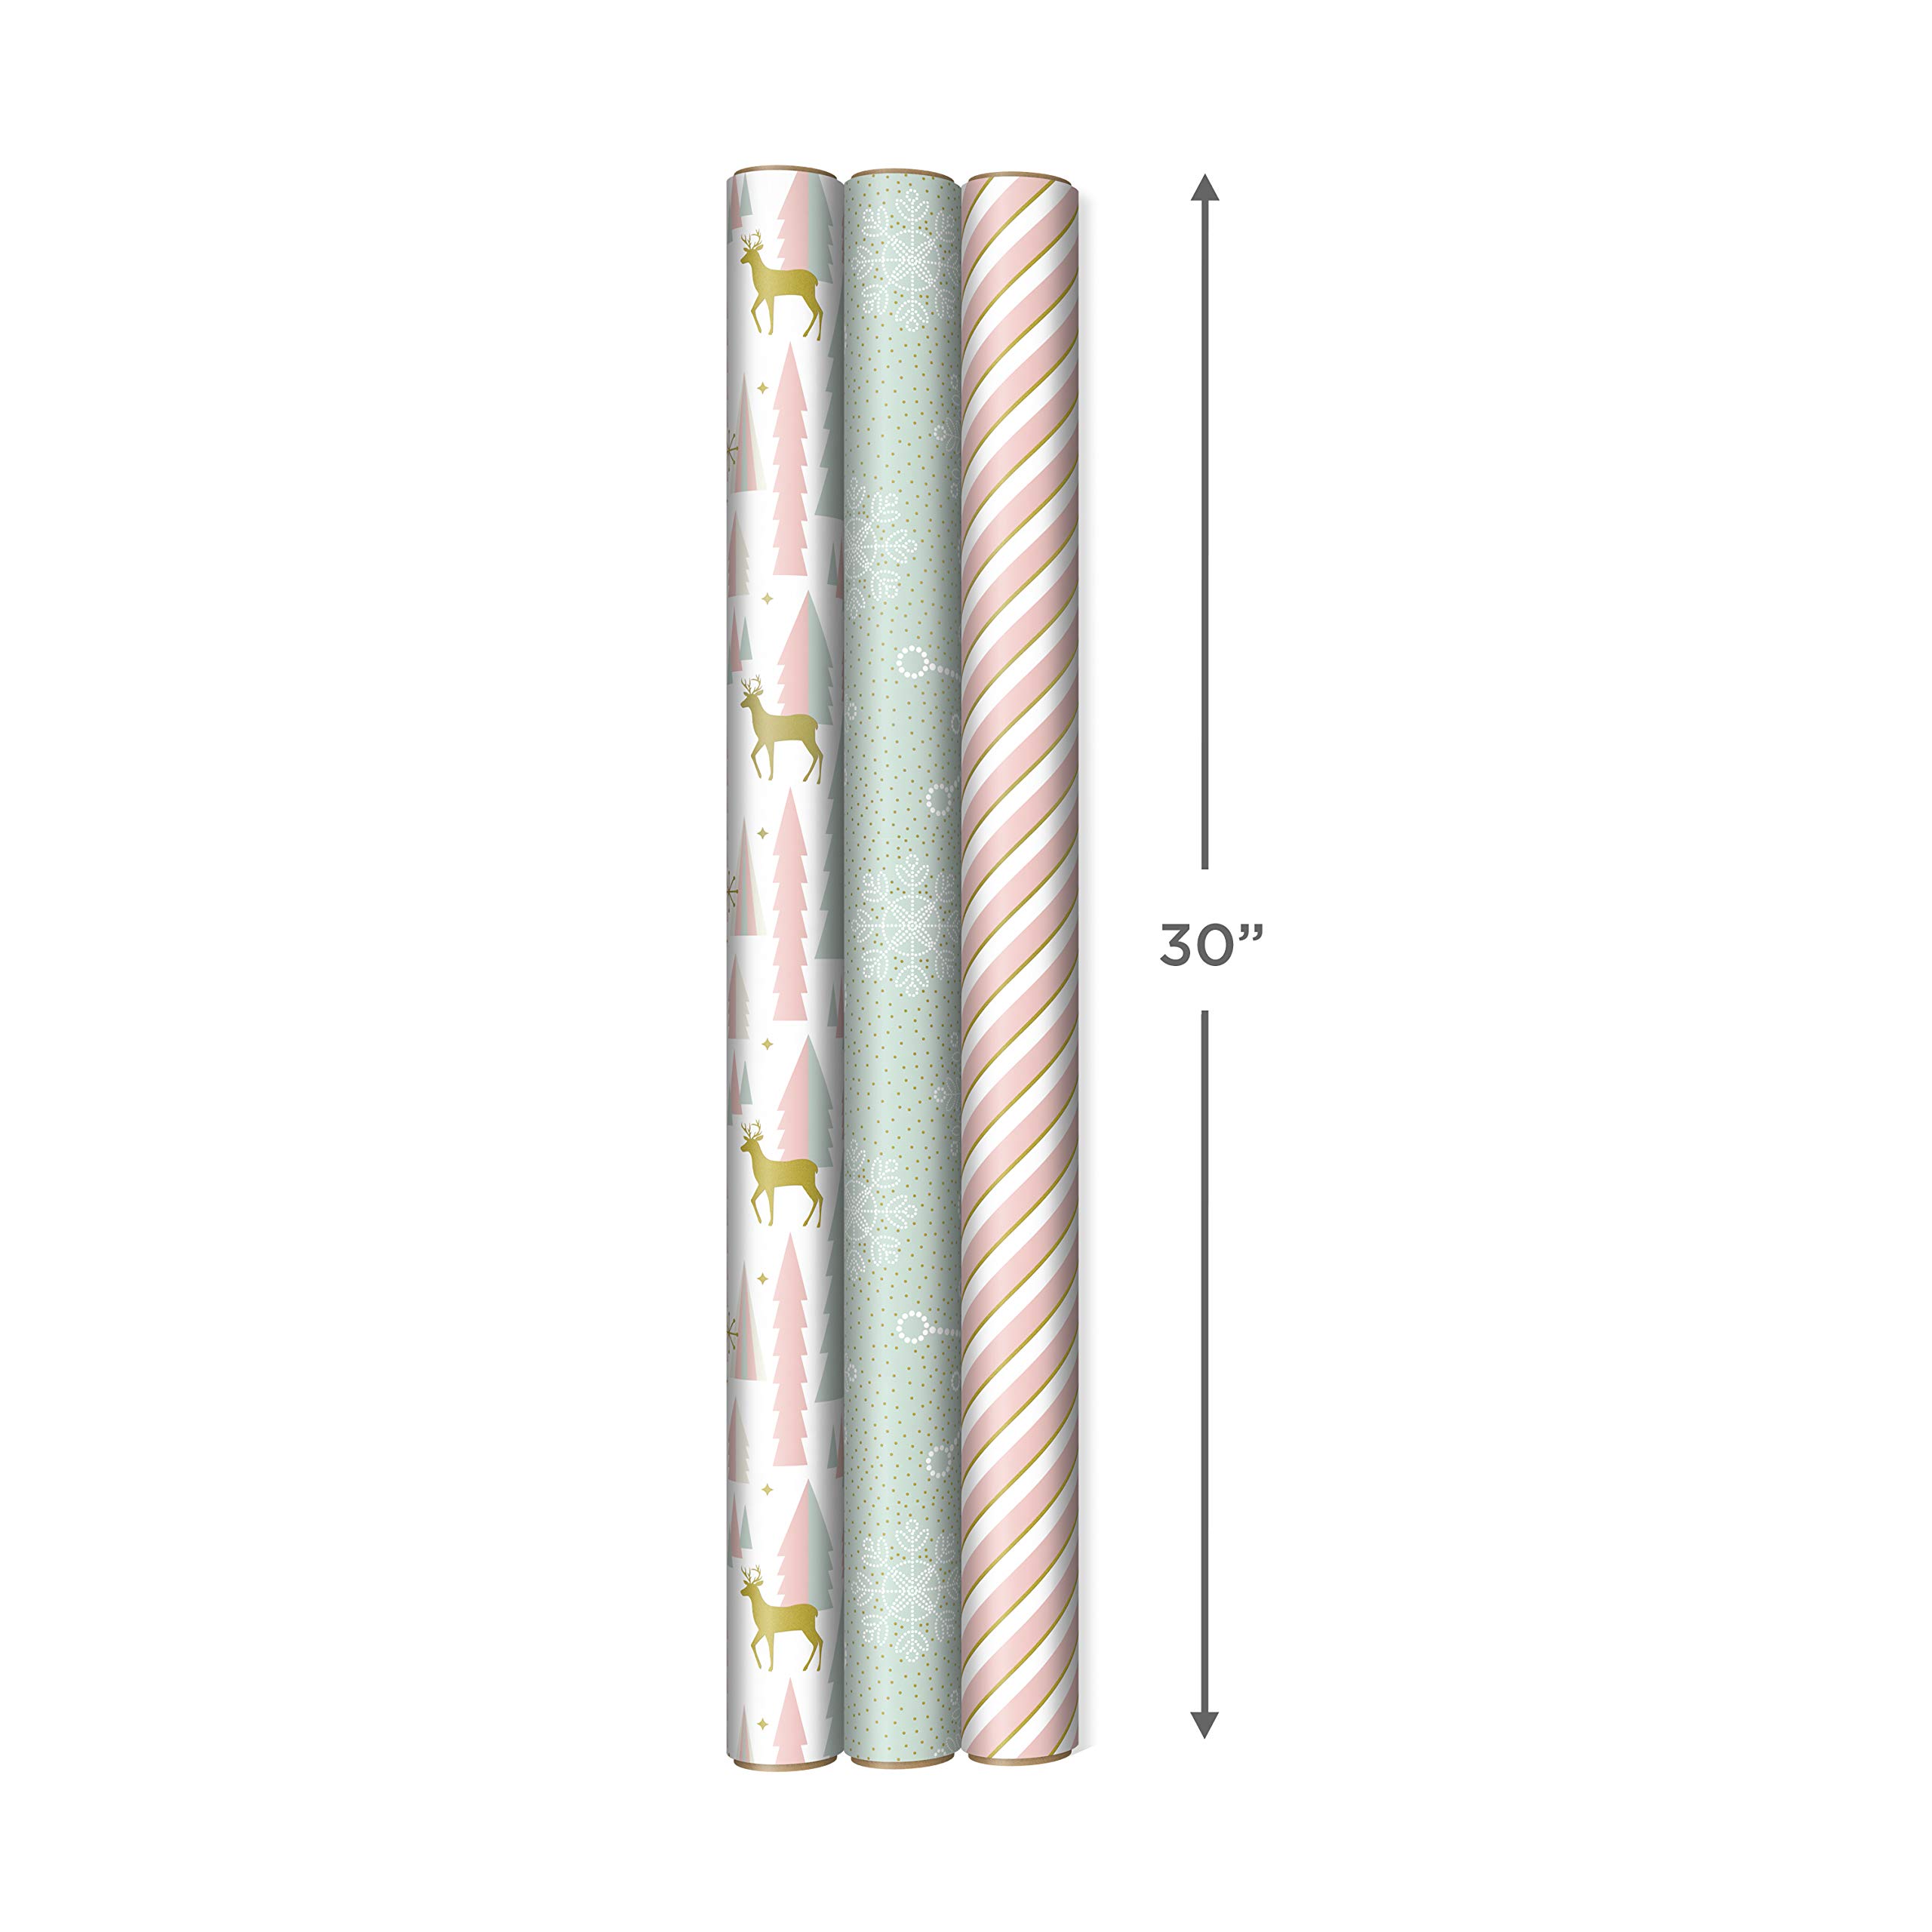 Hallmark Peachy Pink Christmas Wrapping Paper with Cut Lines on Reverse (3 Rolls: 120 sq. ft. ttl) Minty Blue, Gold, Reindeer, Christmas Trees, Snowflakes